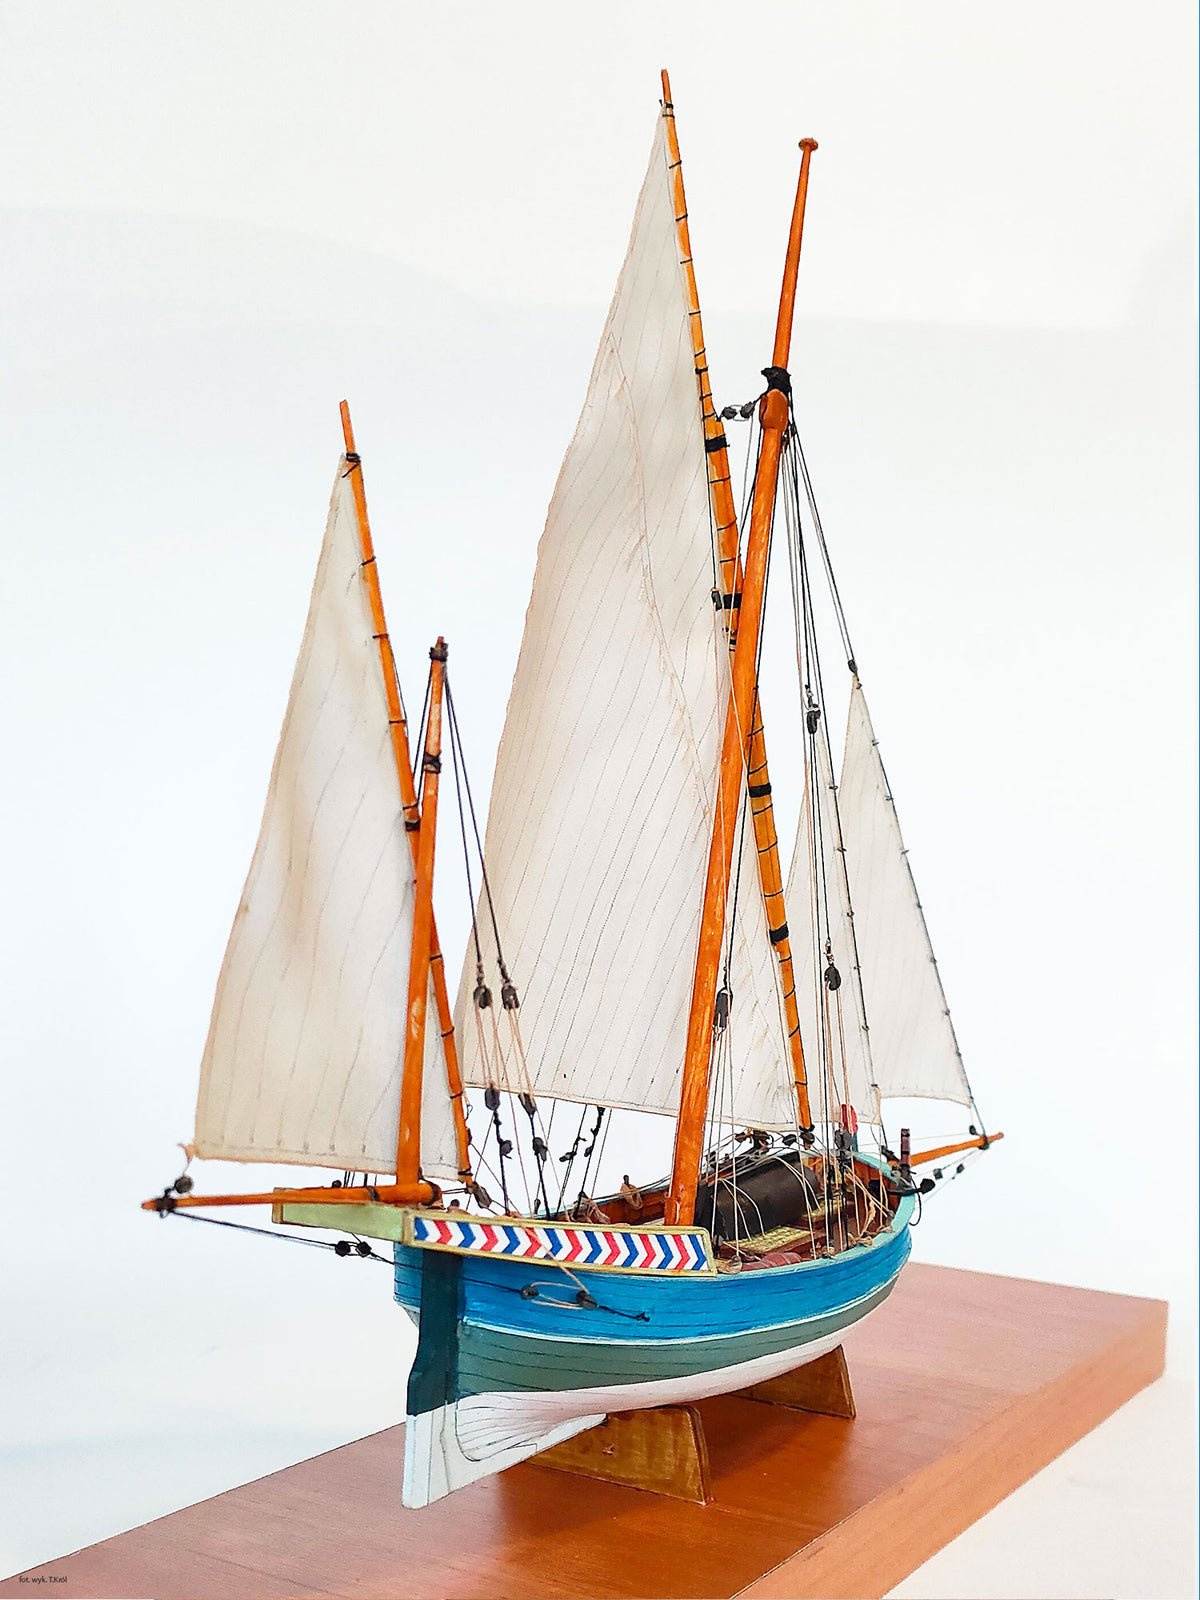 Image of GPM Lautello Sailboat Card Model Kit 1:96, showcasing the detailed replica of the historic sailboat ready for assembly